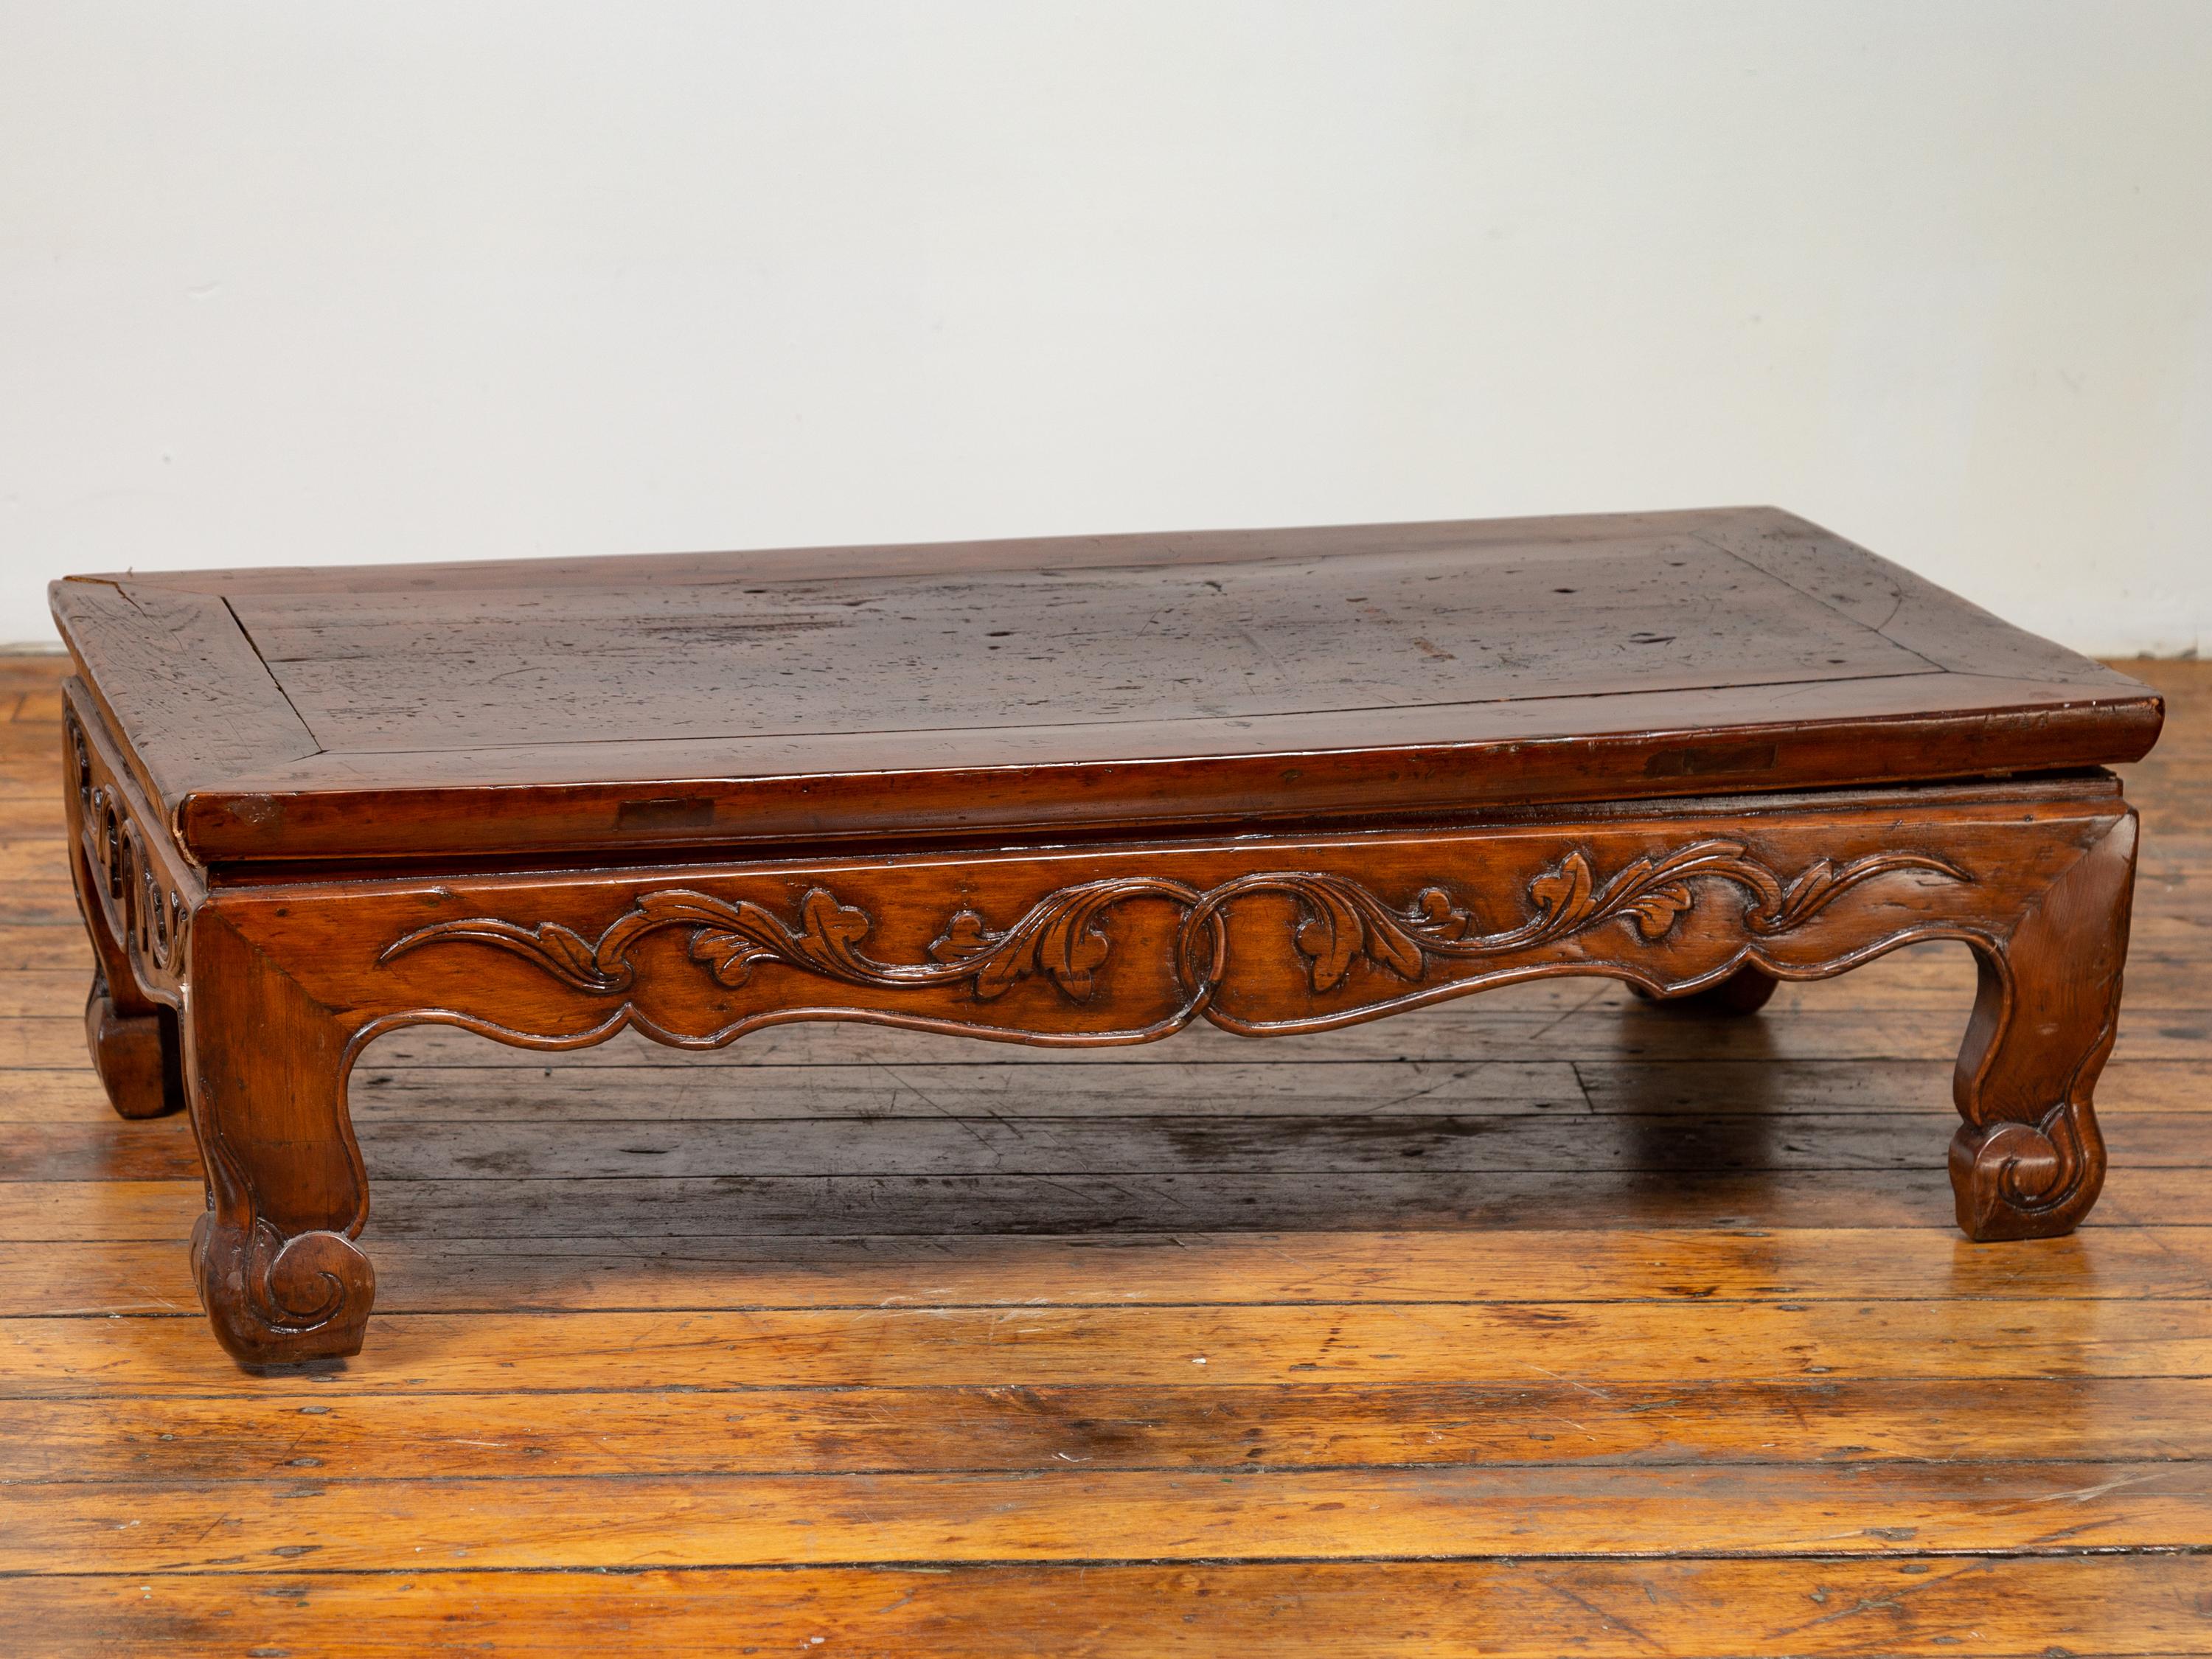 20th Century Antique Chinese Ming Dynasty Style Low Prayer Table with Carved Scalloped Apron